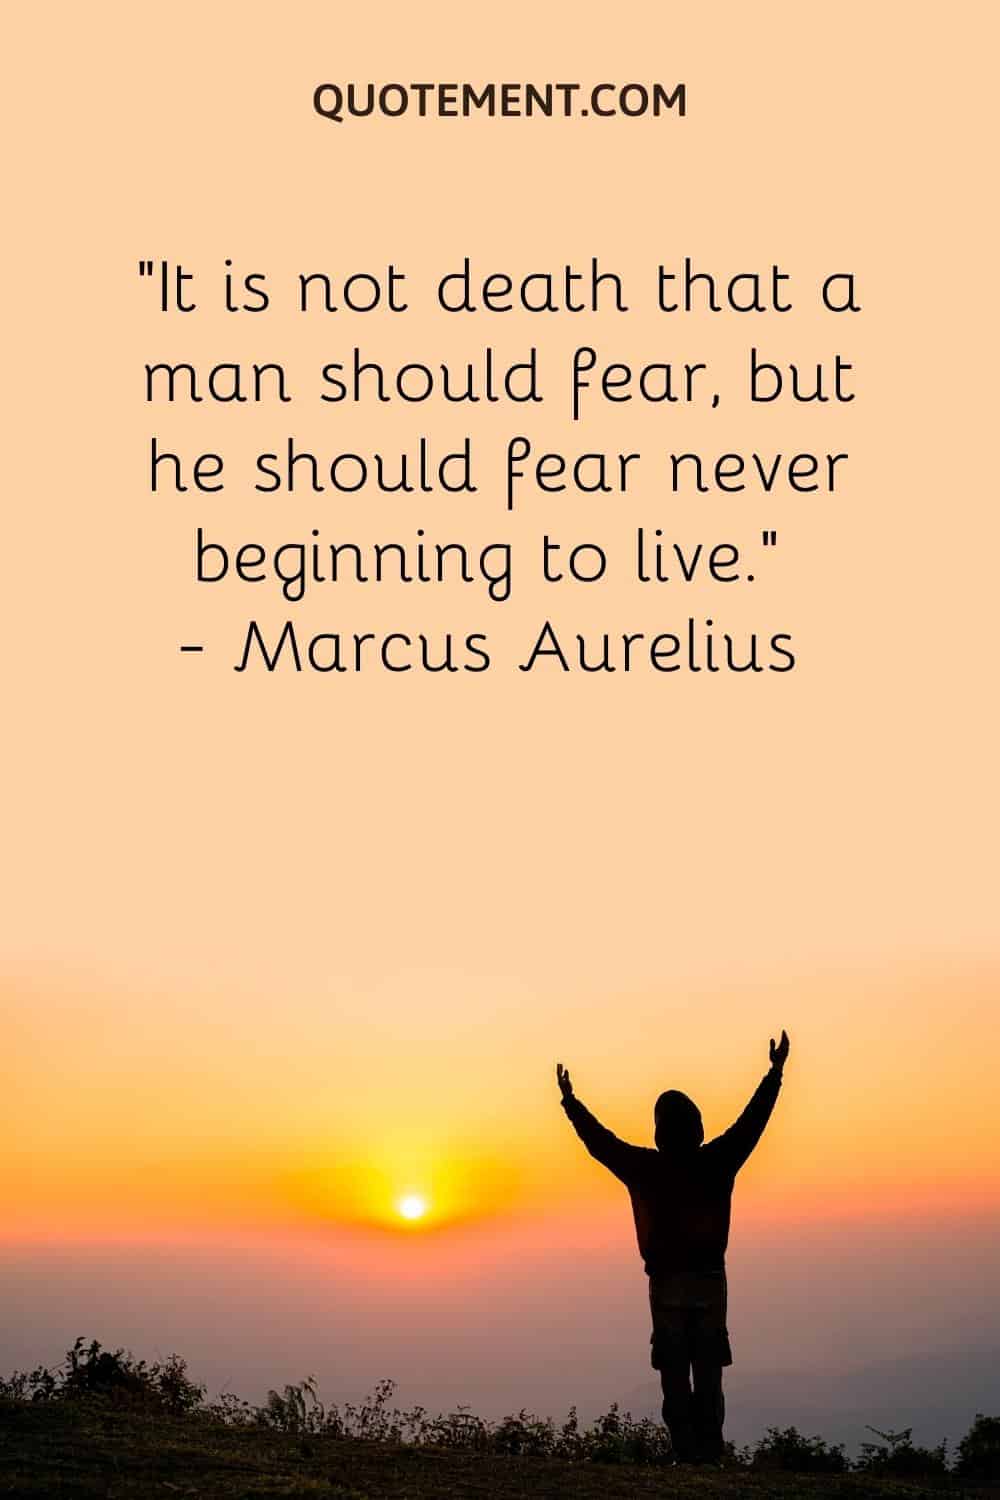 “It is not death that a man should fear, but he should fear never beginning to live.” — Marcus Aurelius